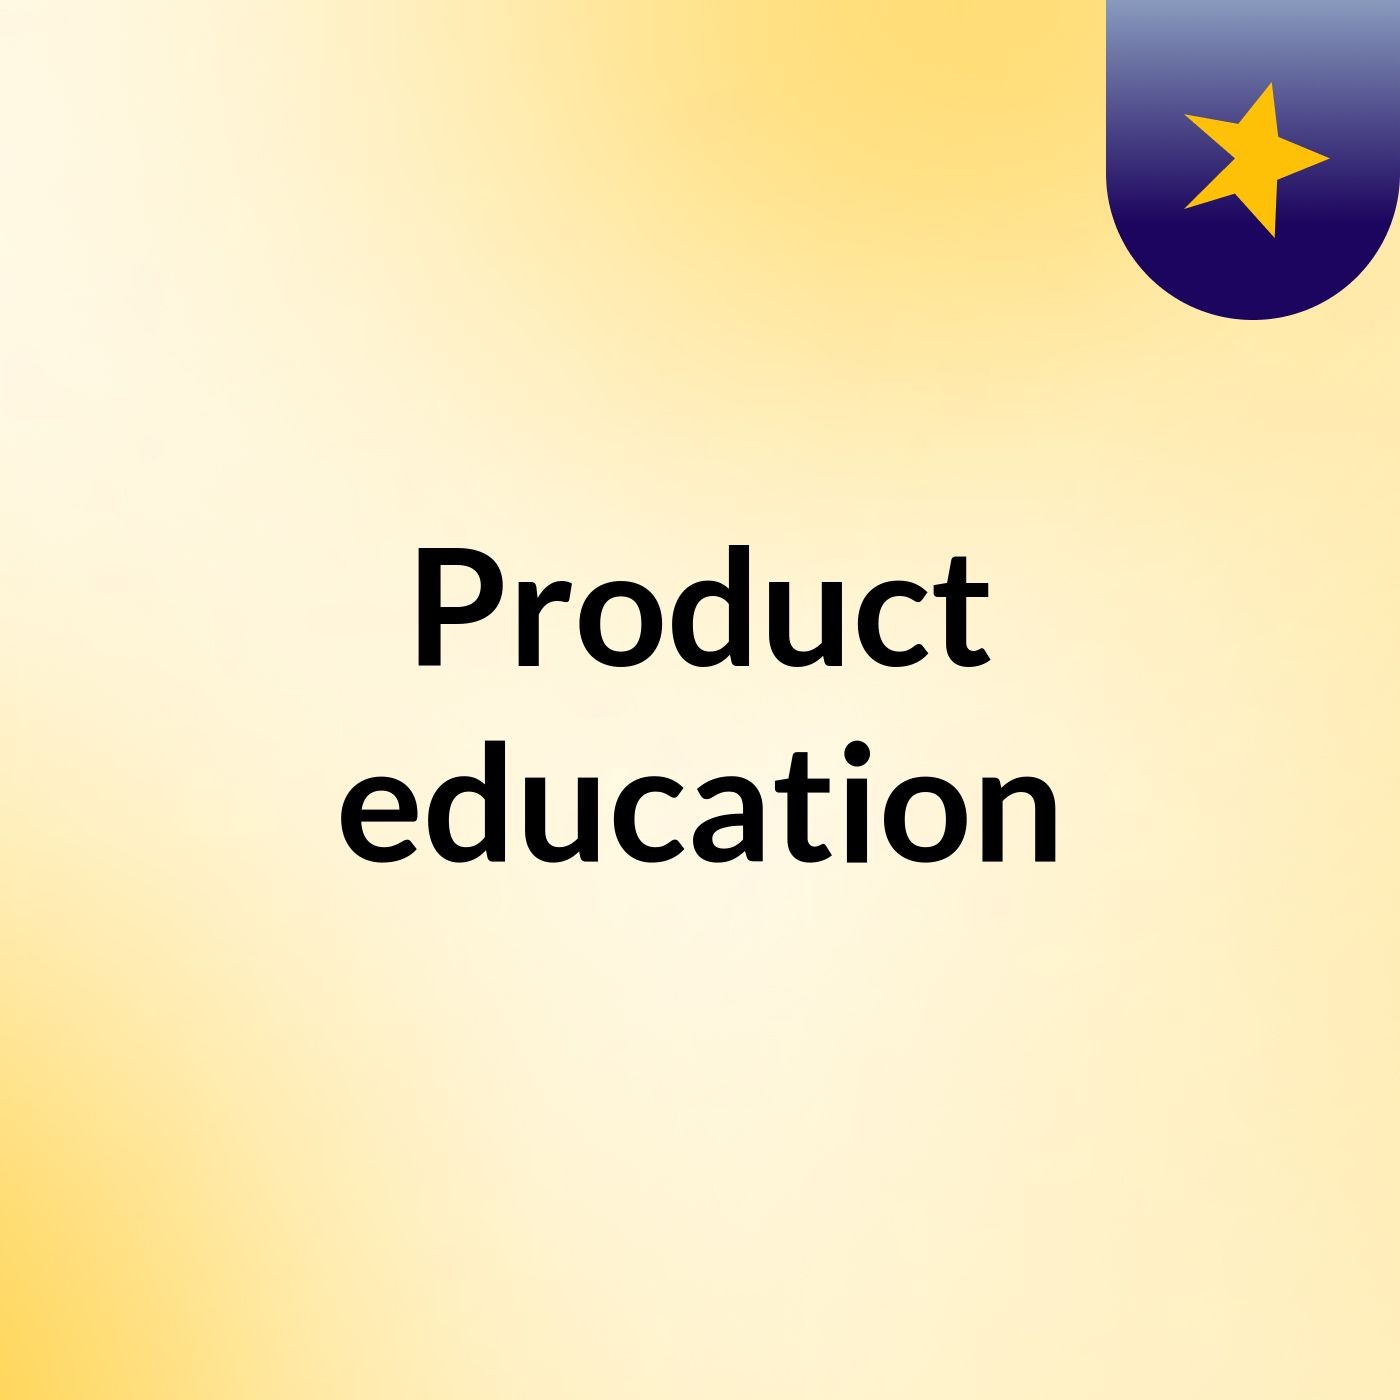 Product education